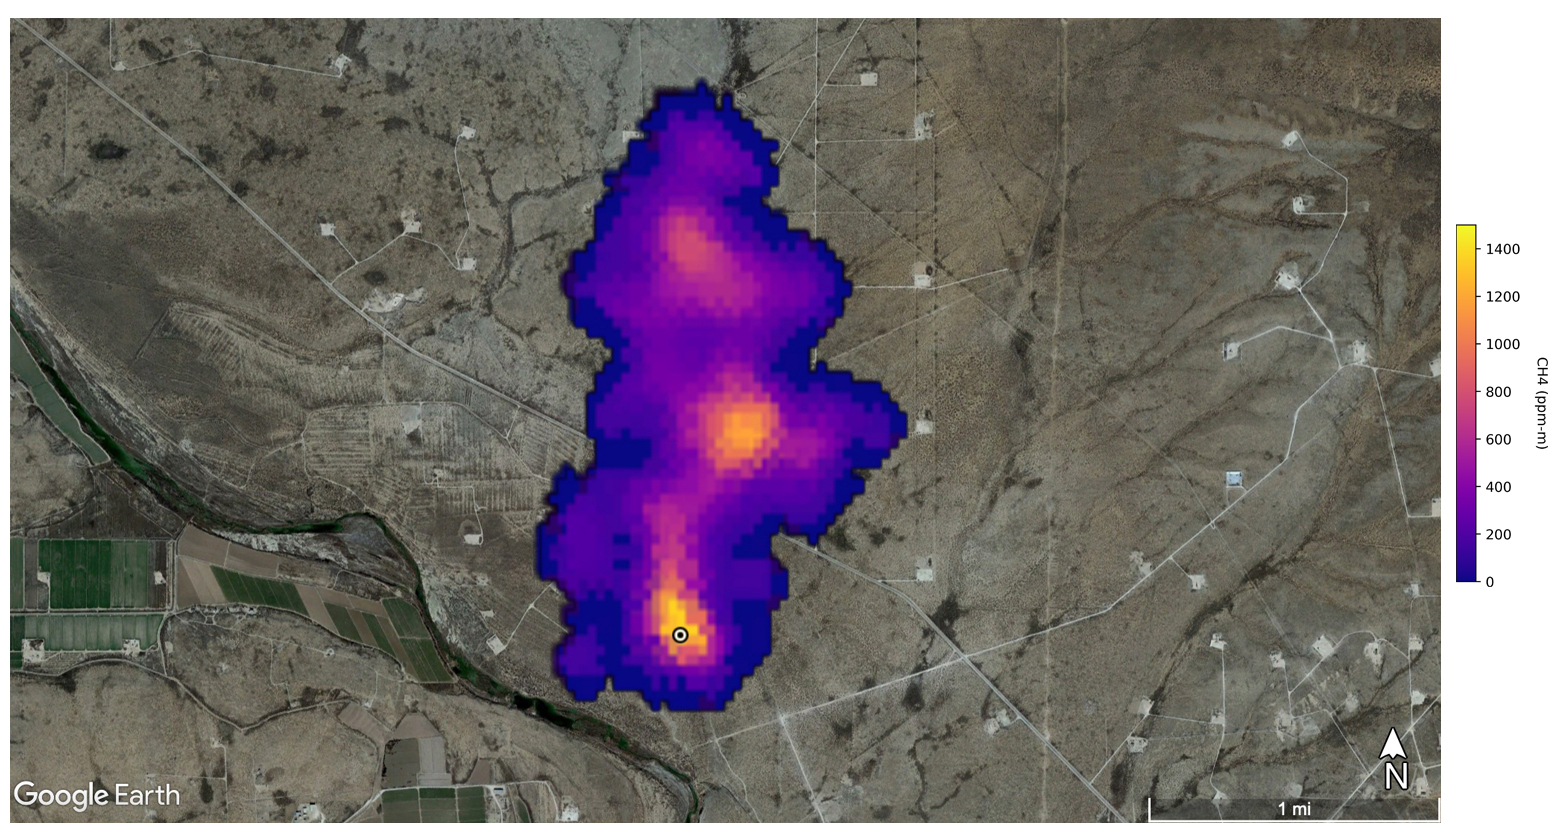 This image shows a methane plume 2 miles (3 kilometers) long that NASA’s Earth Surface Mineral Dust Source Investigation mission detected southeast of Carlsbad, New Mexico.